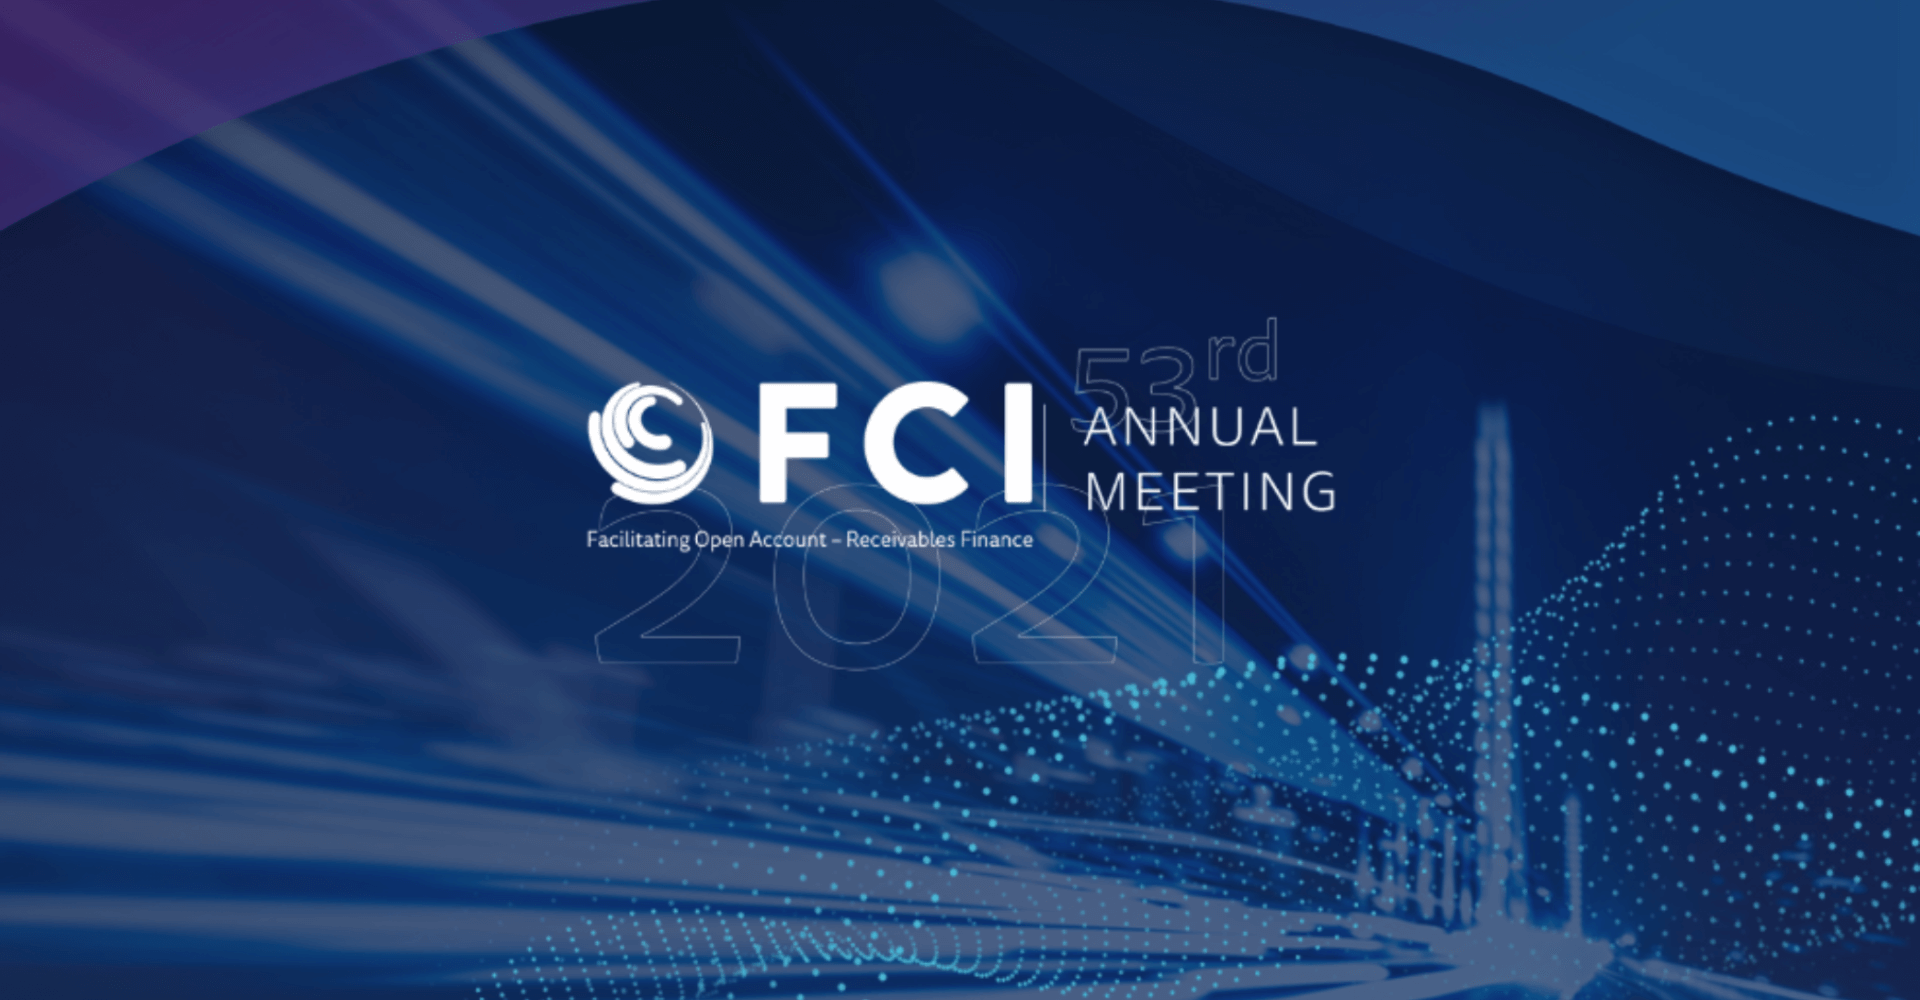 CODIX is a Silver Sponsor of the upcoming FCI’s 53rd Annual Meeting